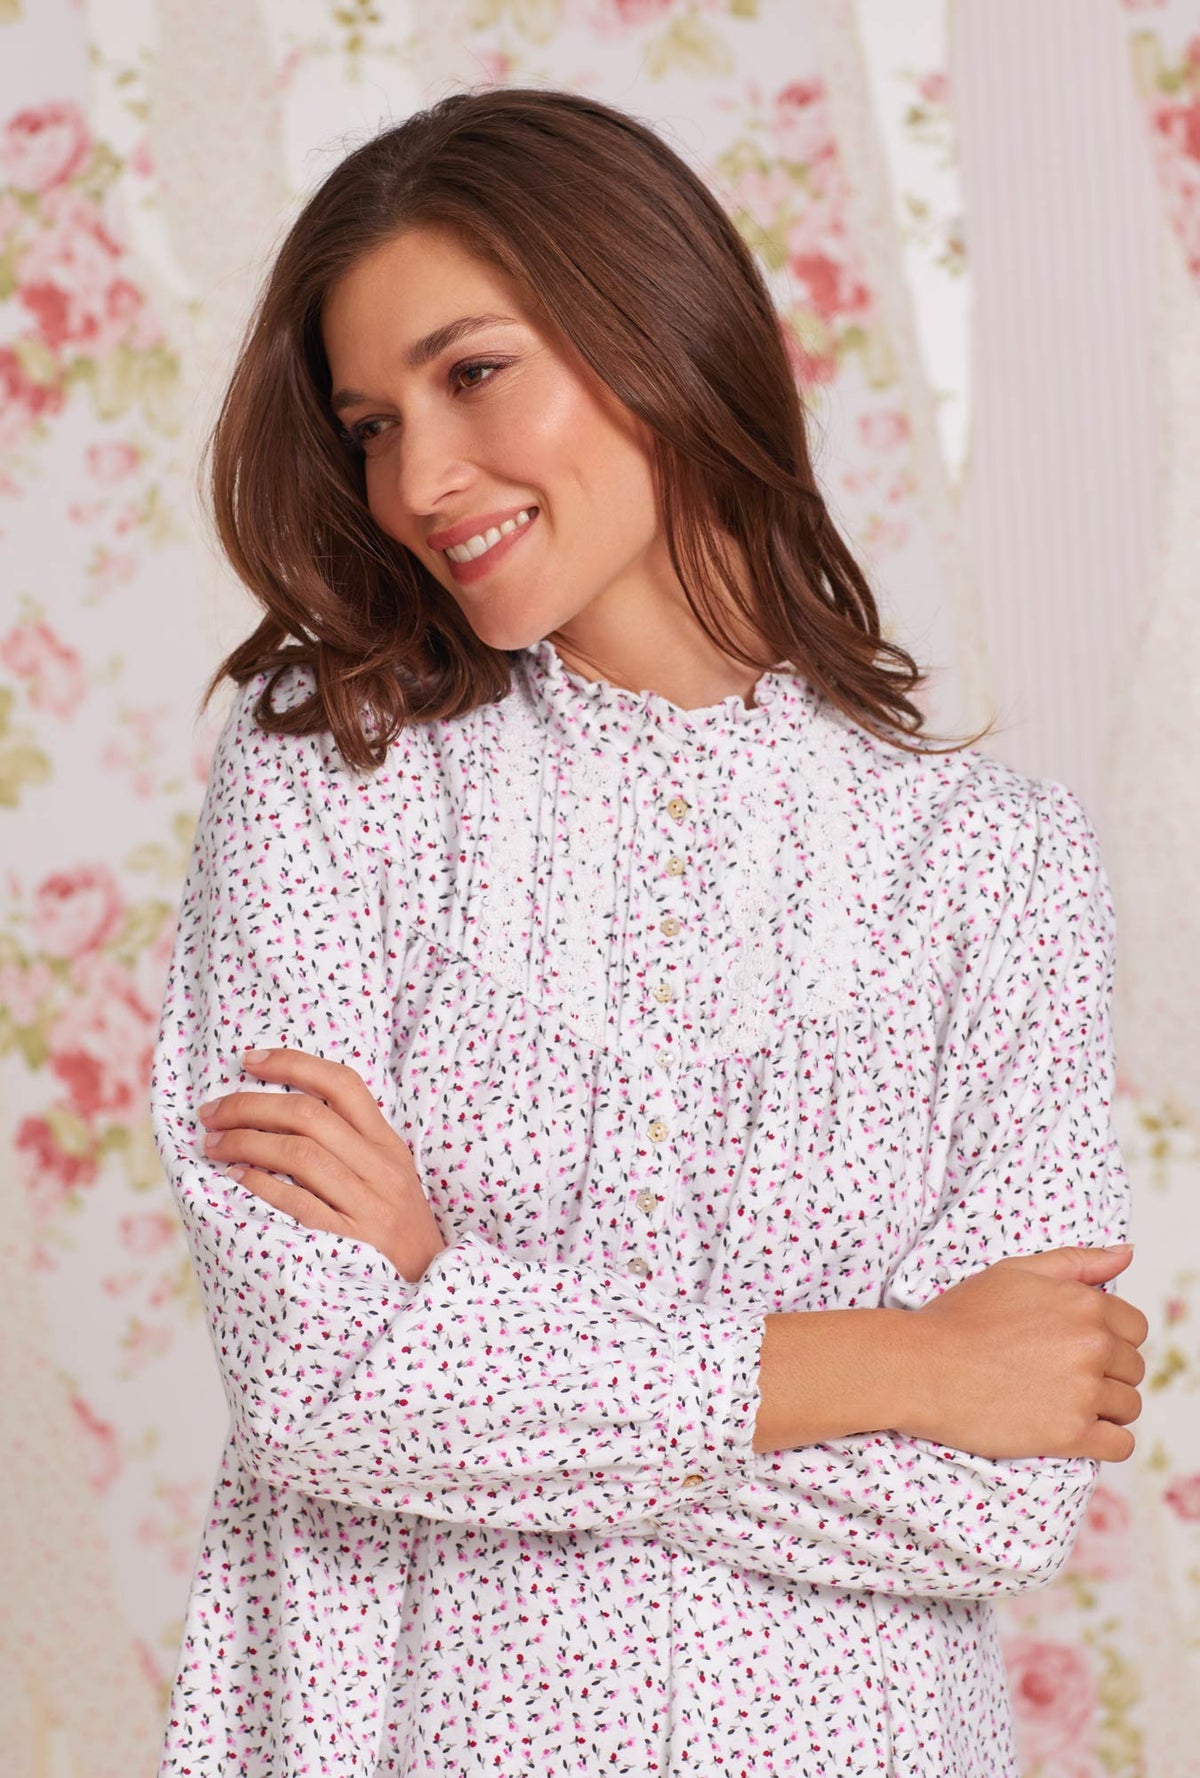 A lady wearing white long sleeve cotton flannel madeline highneck nightgown with joyful berry print.